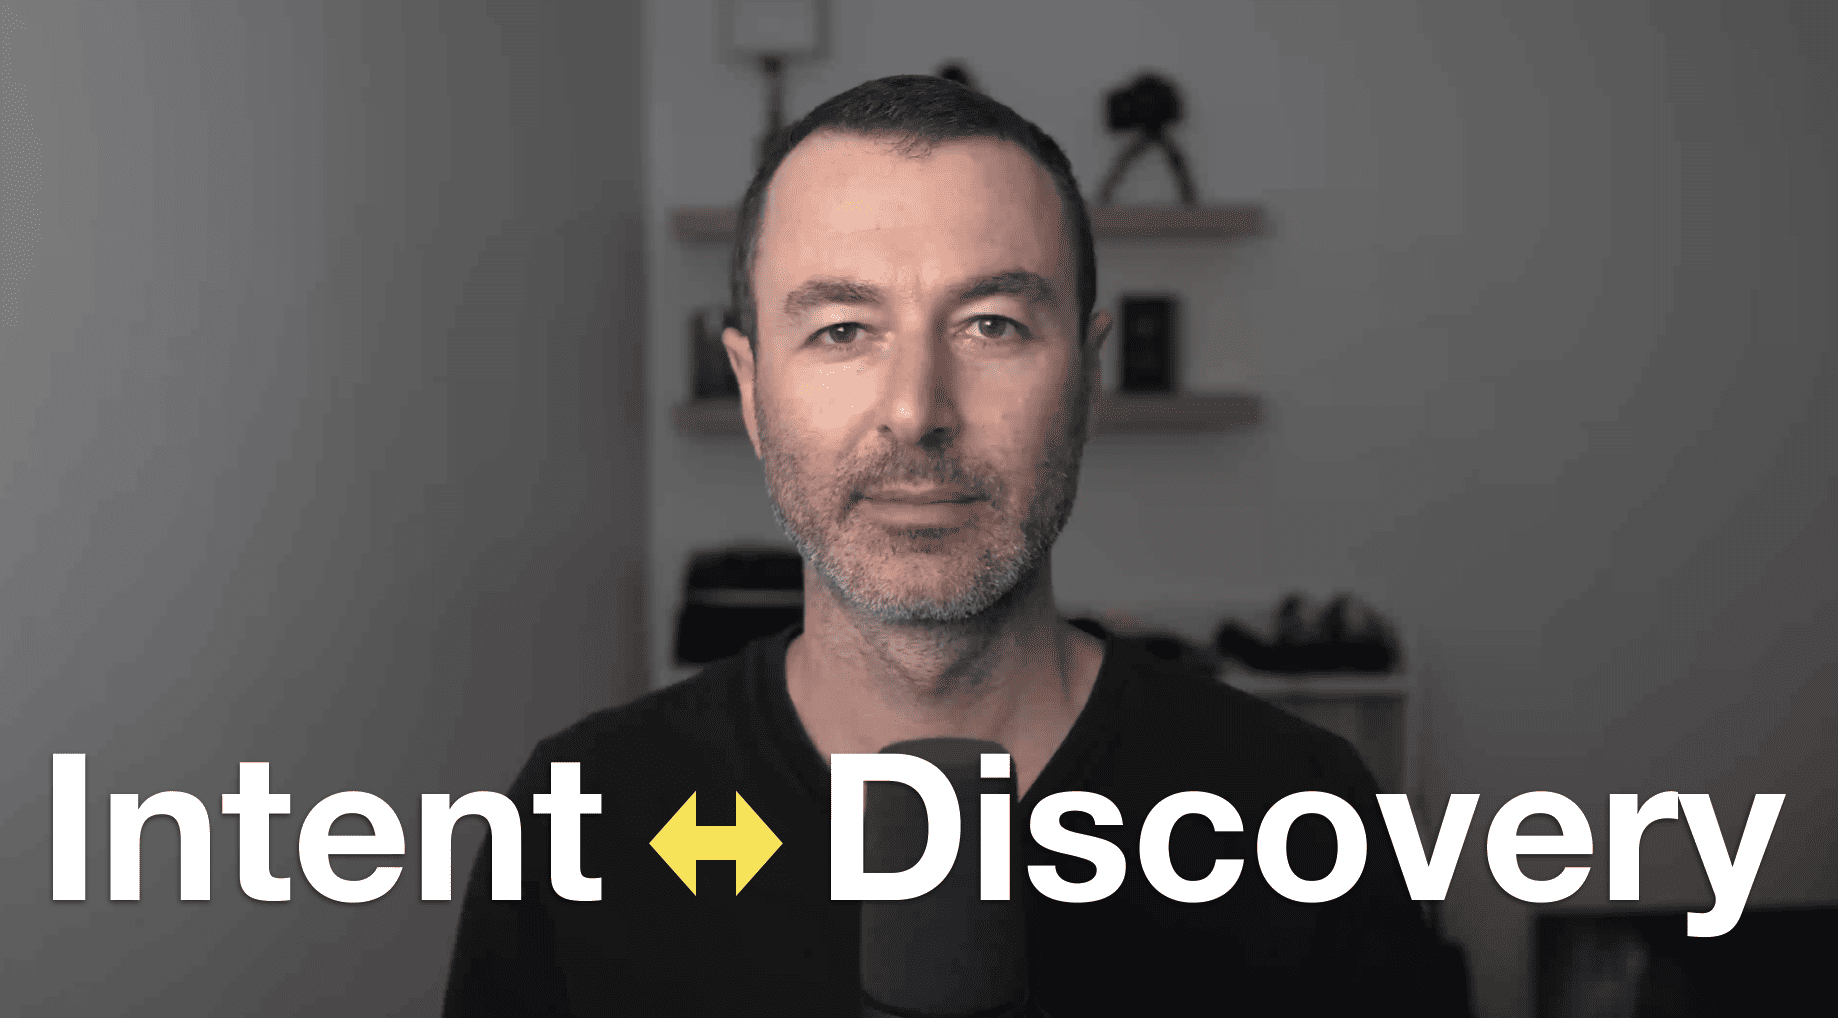 What Is ‘Intent’ Versus ‘Discovery’ – The Big Two Online Marketing Concepts